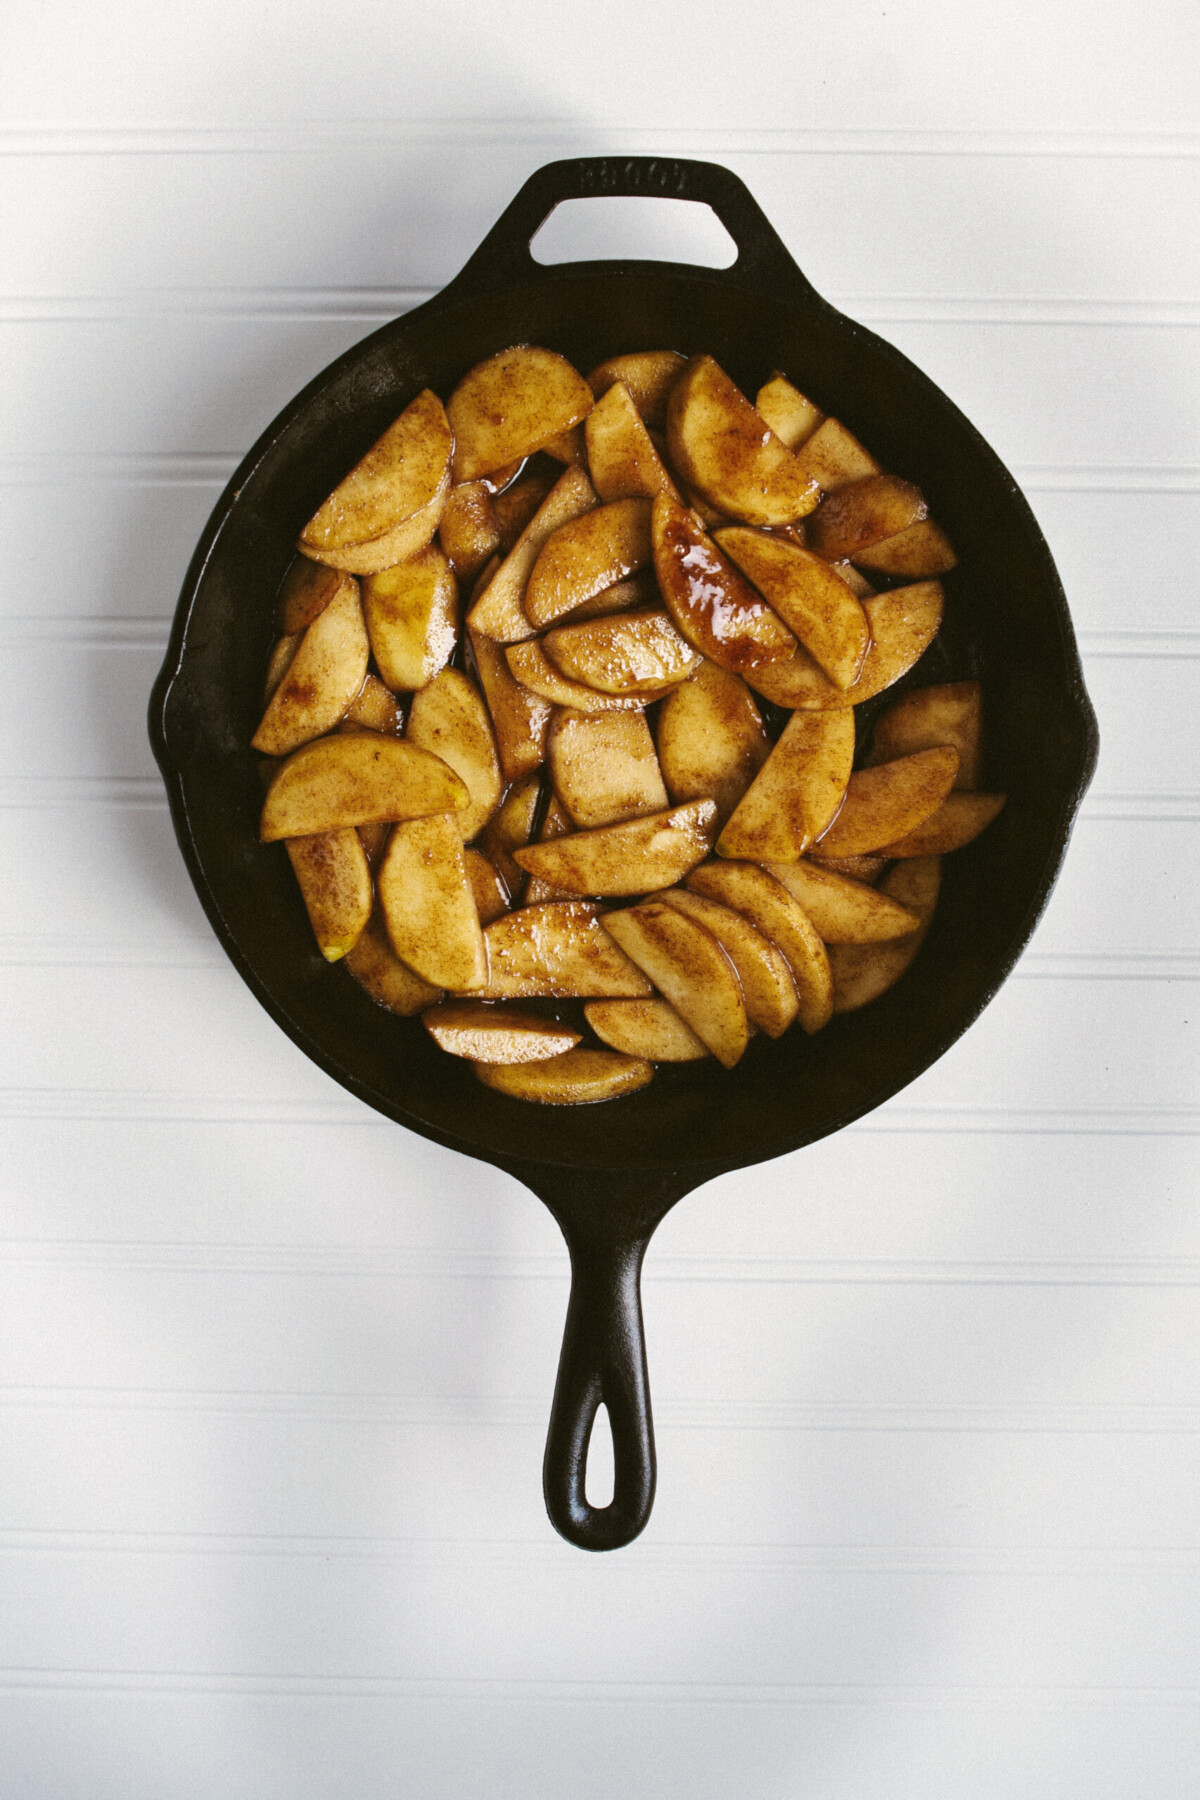 Photo of cooked apples and sugar in a cast iron skillet